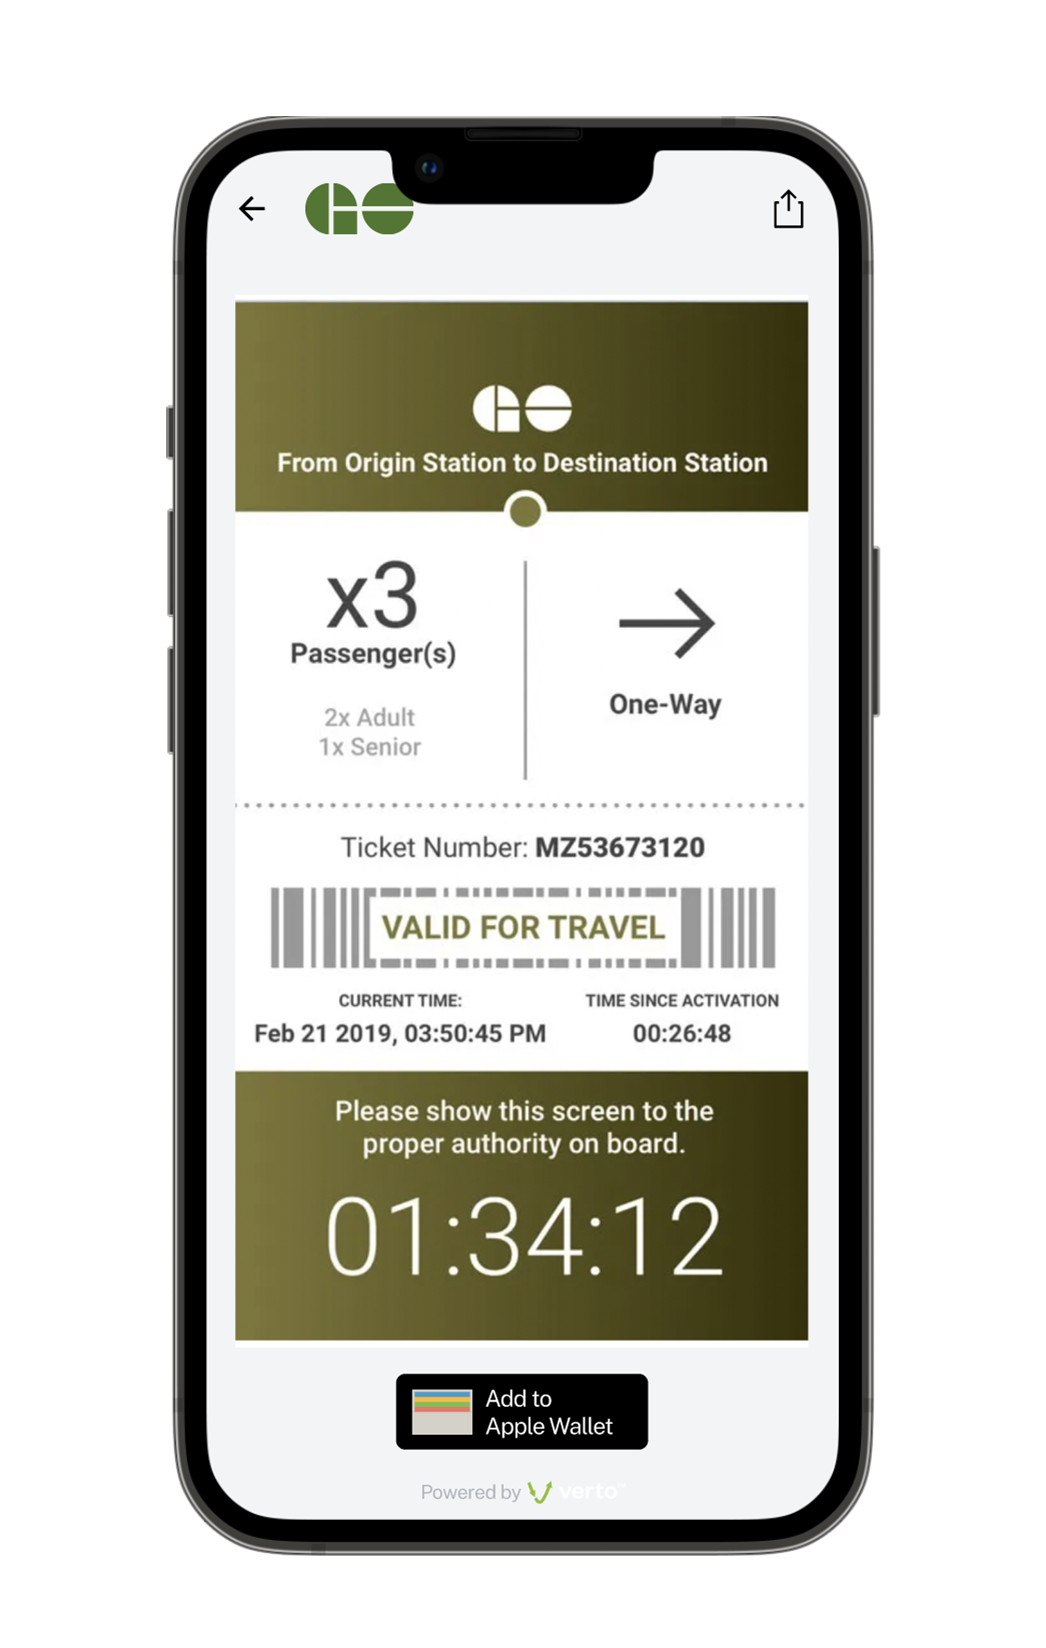 Buyers effortlessly find and access tickets and digital goods. Tickets can be added to Apple/ Google wallet.